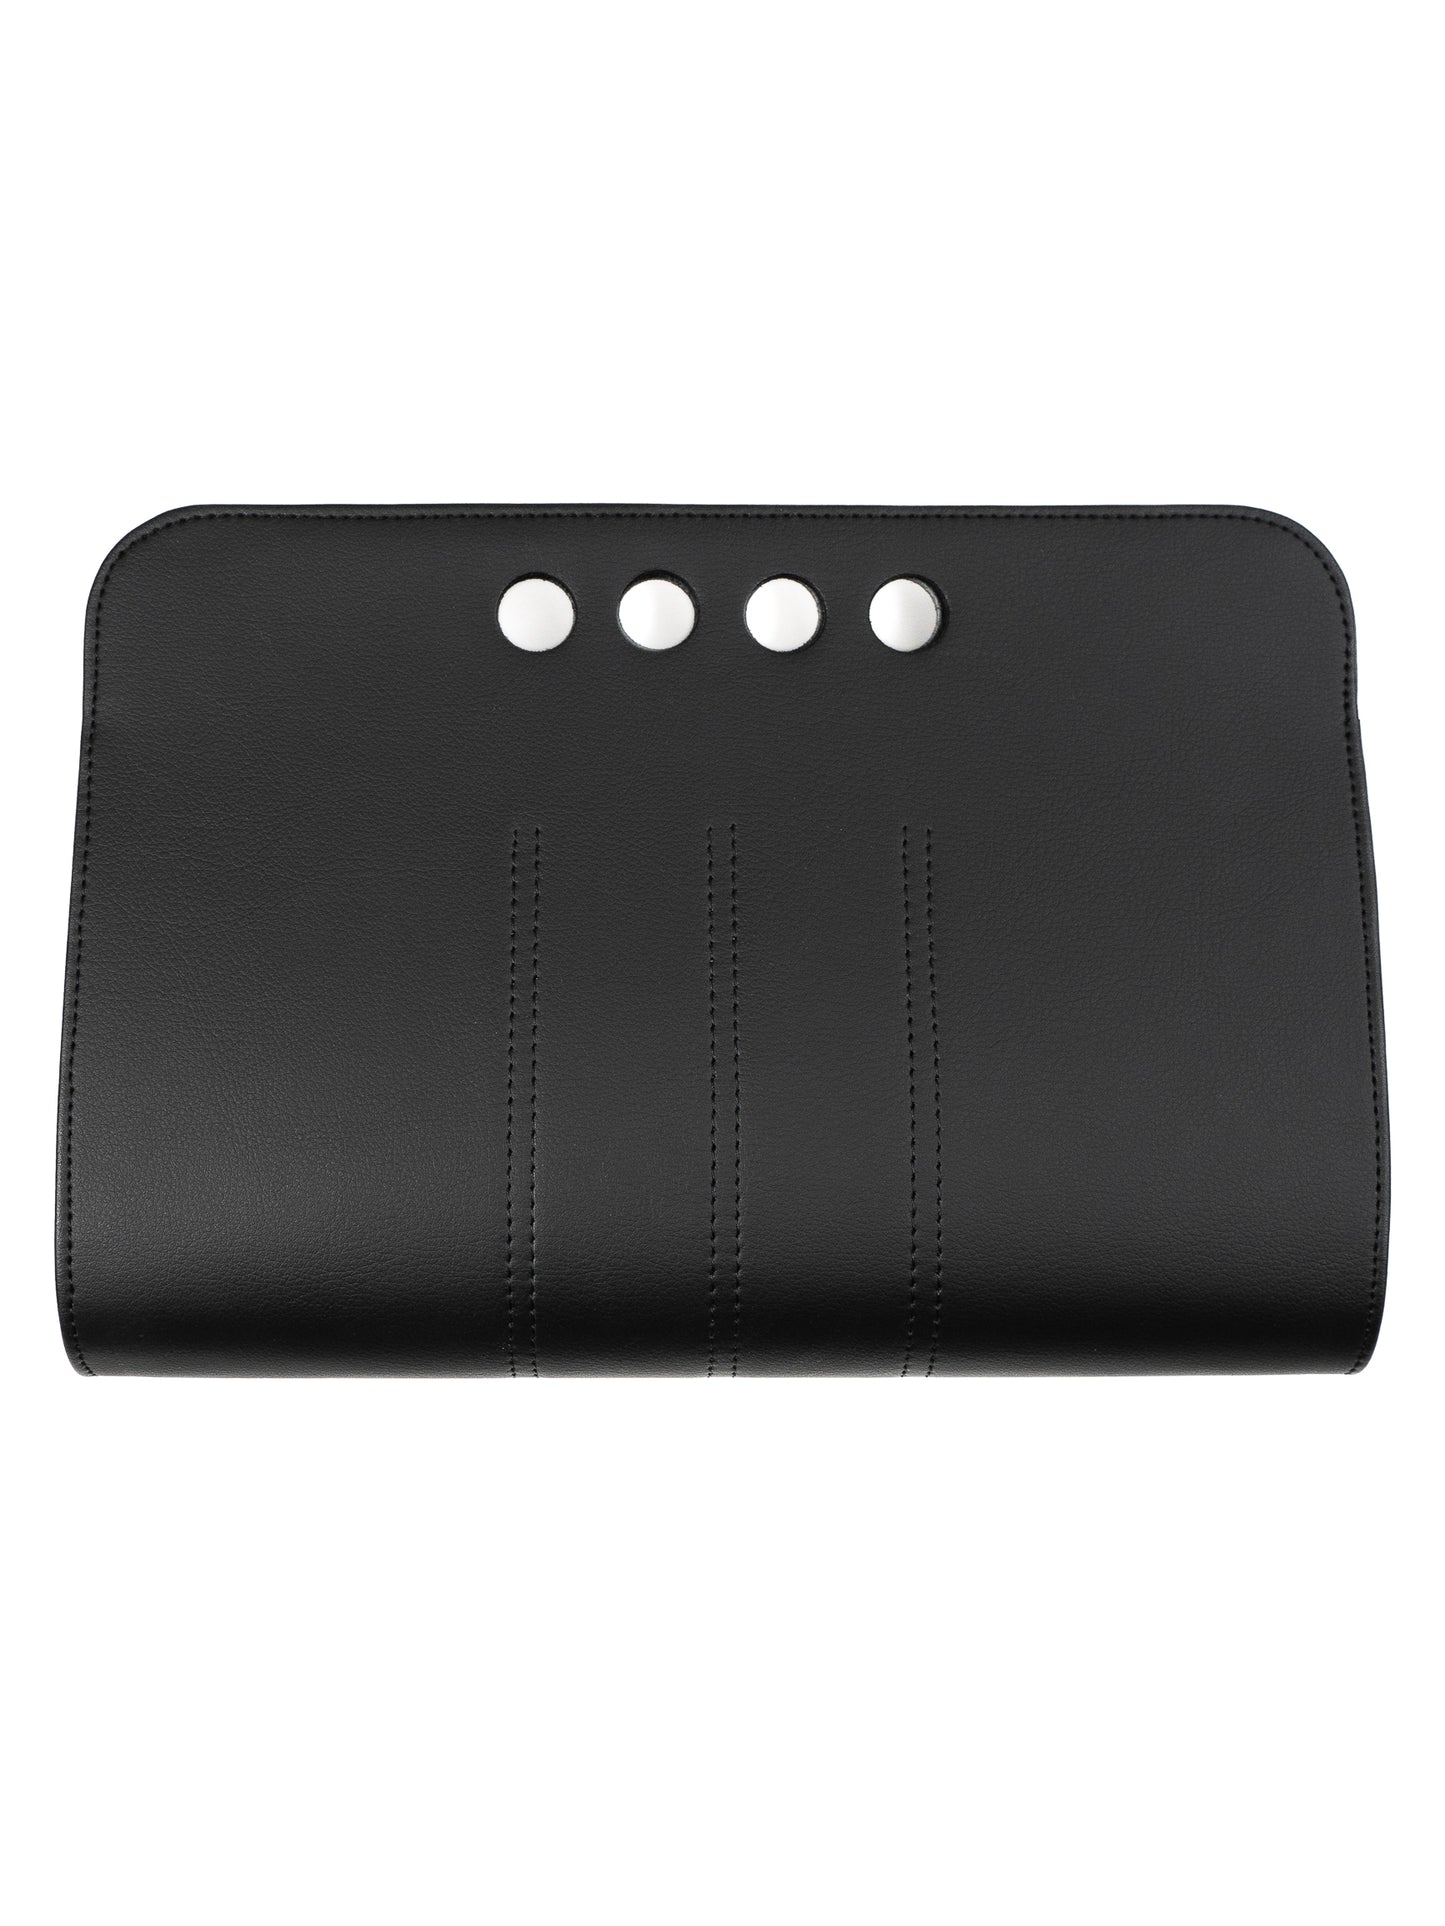 Chic Vegan Leather Clutch - Black/Large (limited edition)